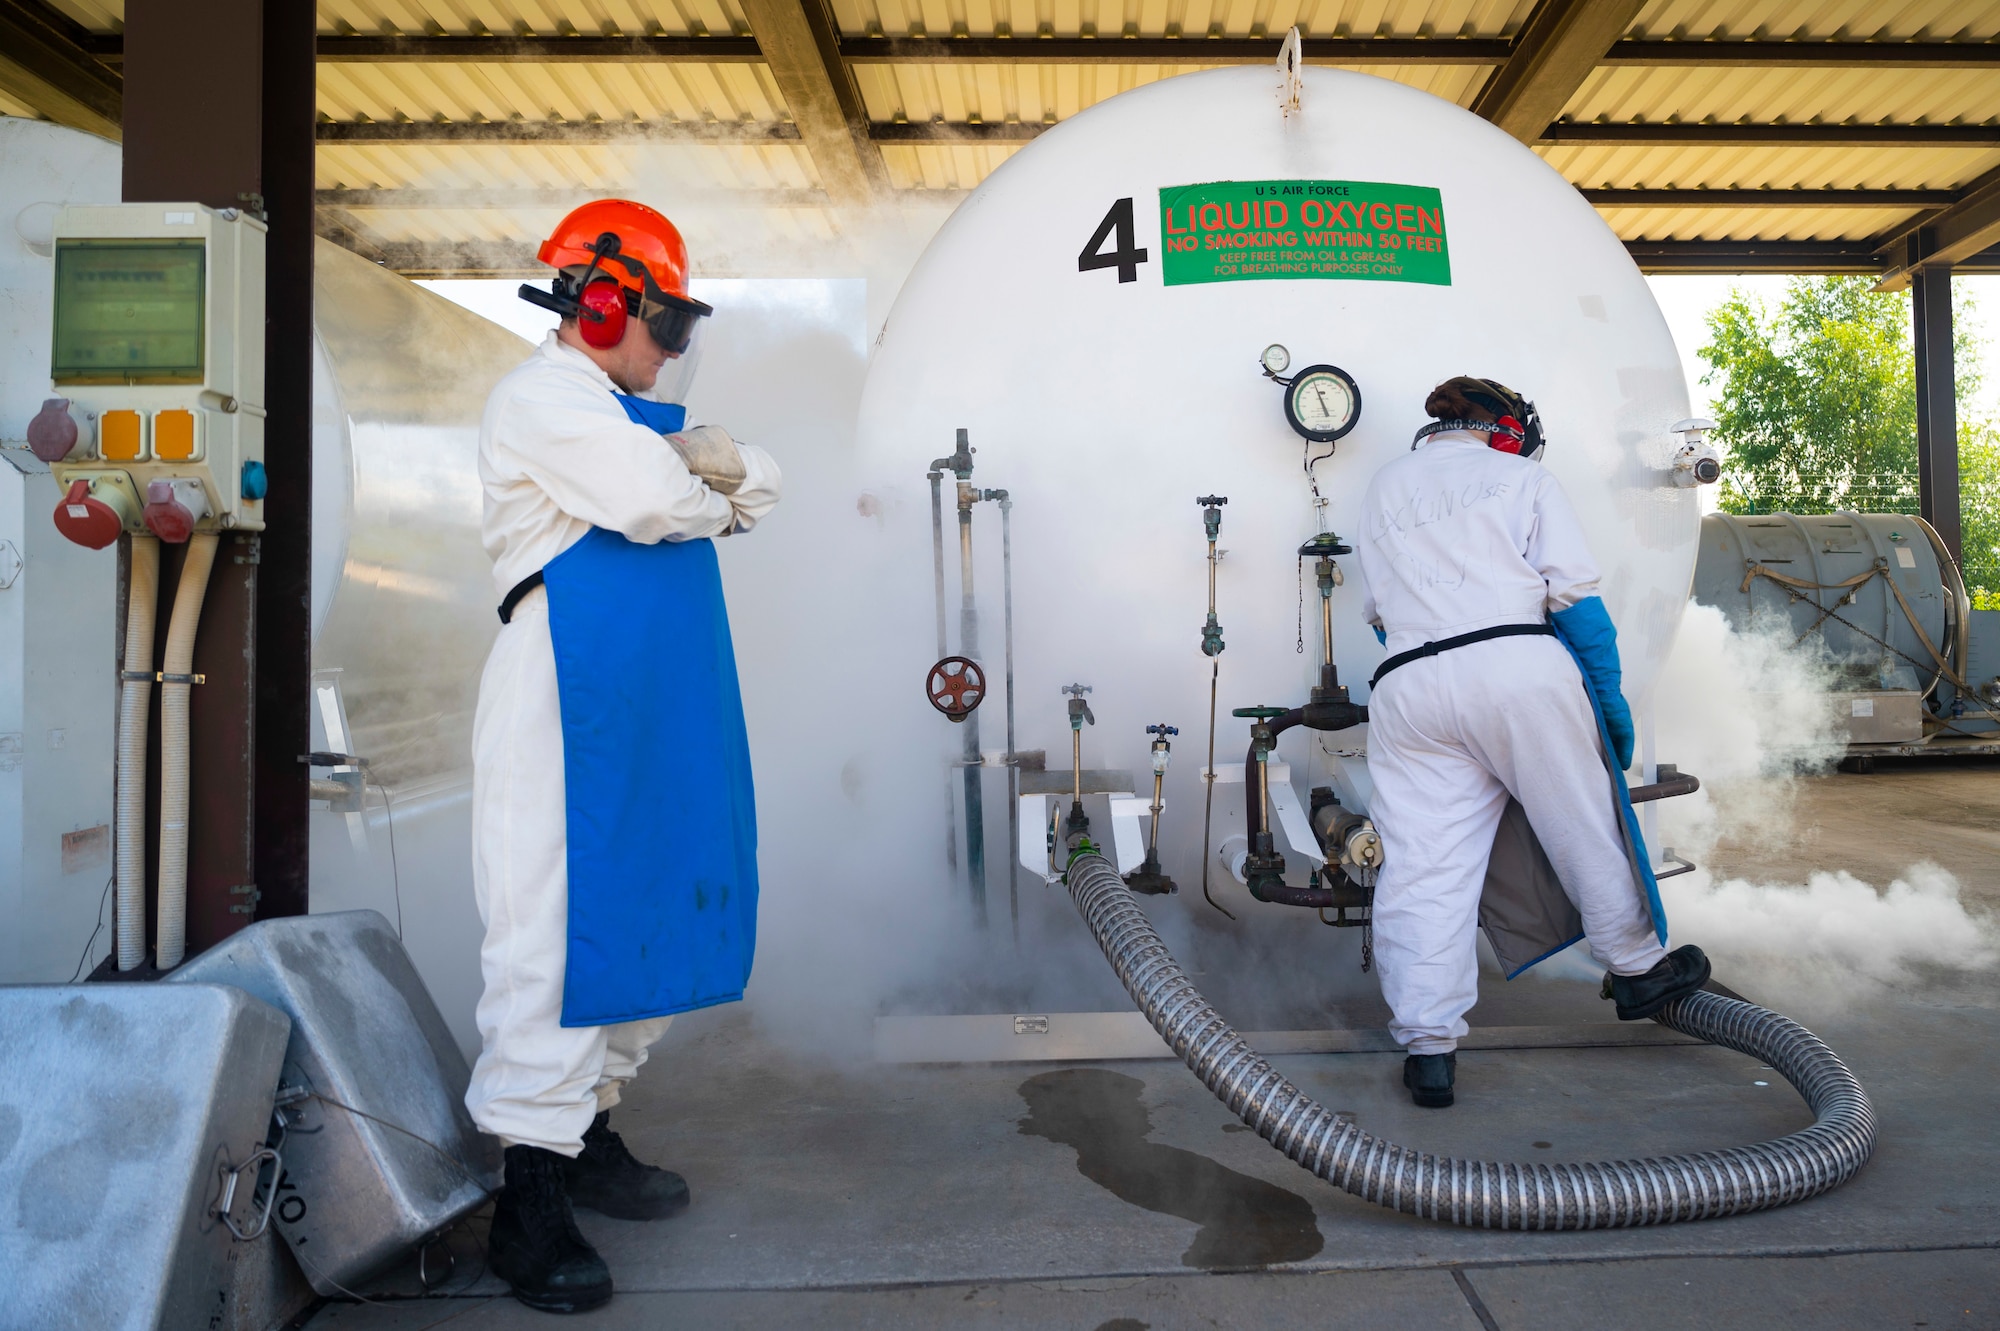 U.S. Air Force Senior Airman Aaron Irving, 86th Logistics Readiness Squadron fuels facilities operator, left, and Airman 1st Class Amber Butler 86th LRS fuels facilities operator check the levels of liquid oxygen